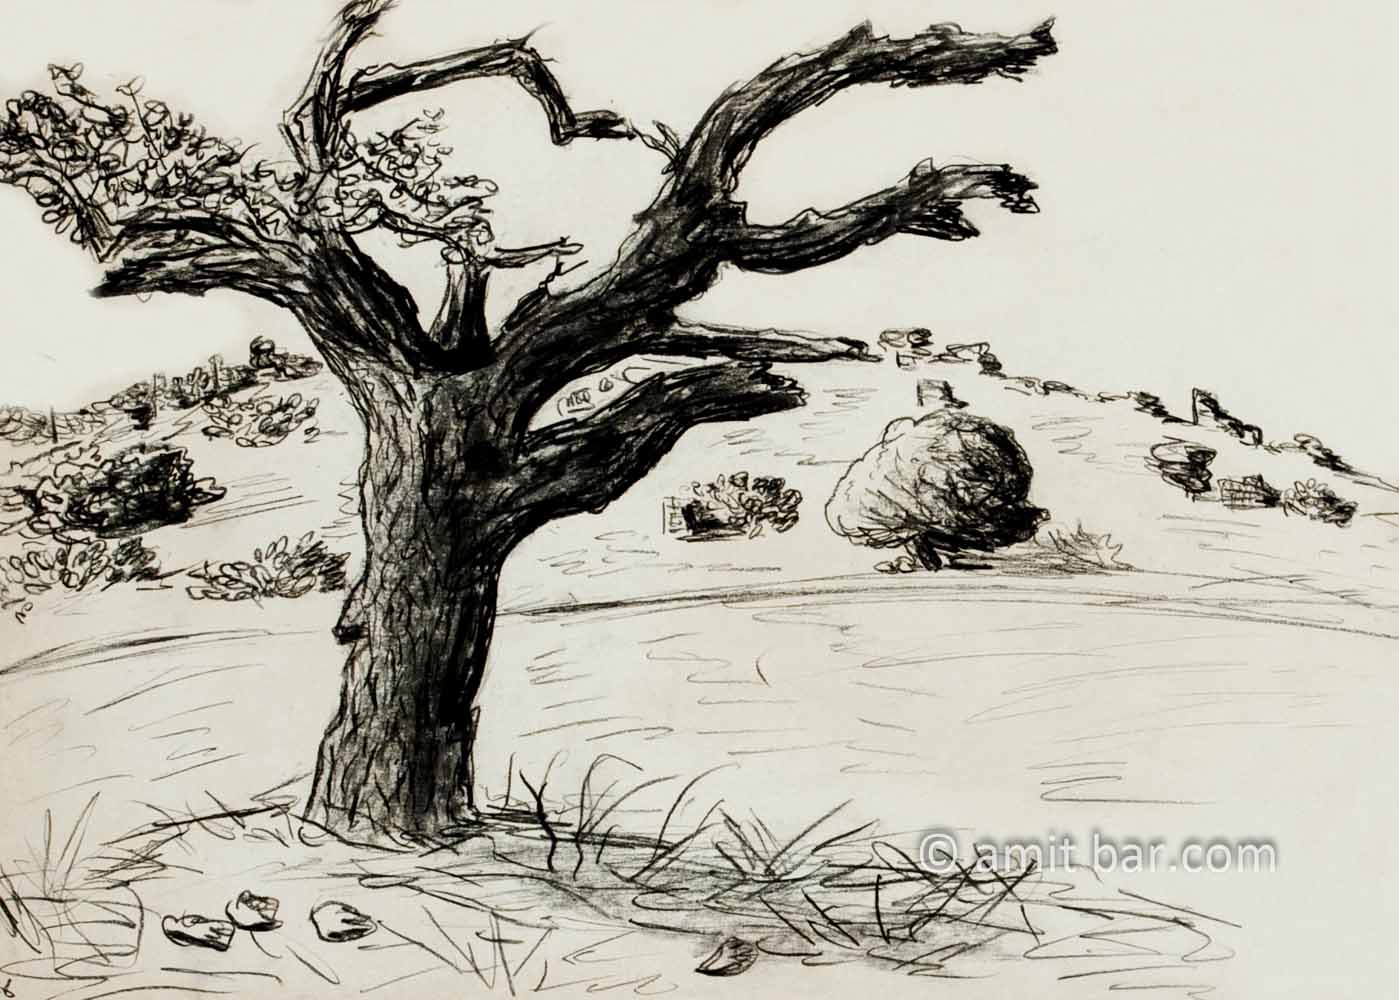 The old oak tree in charcoal